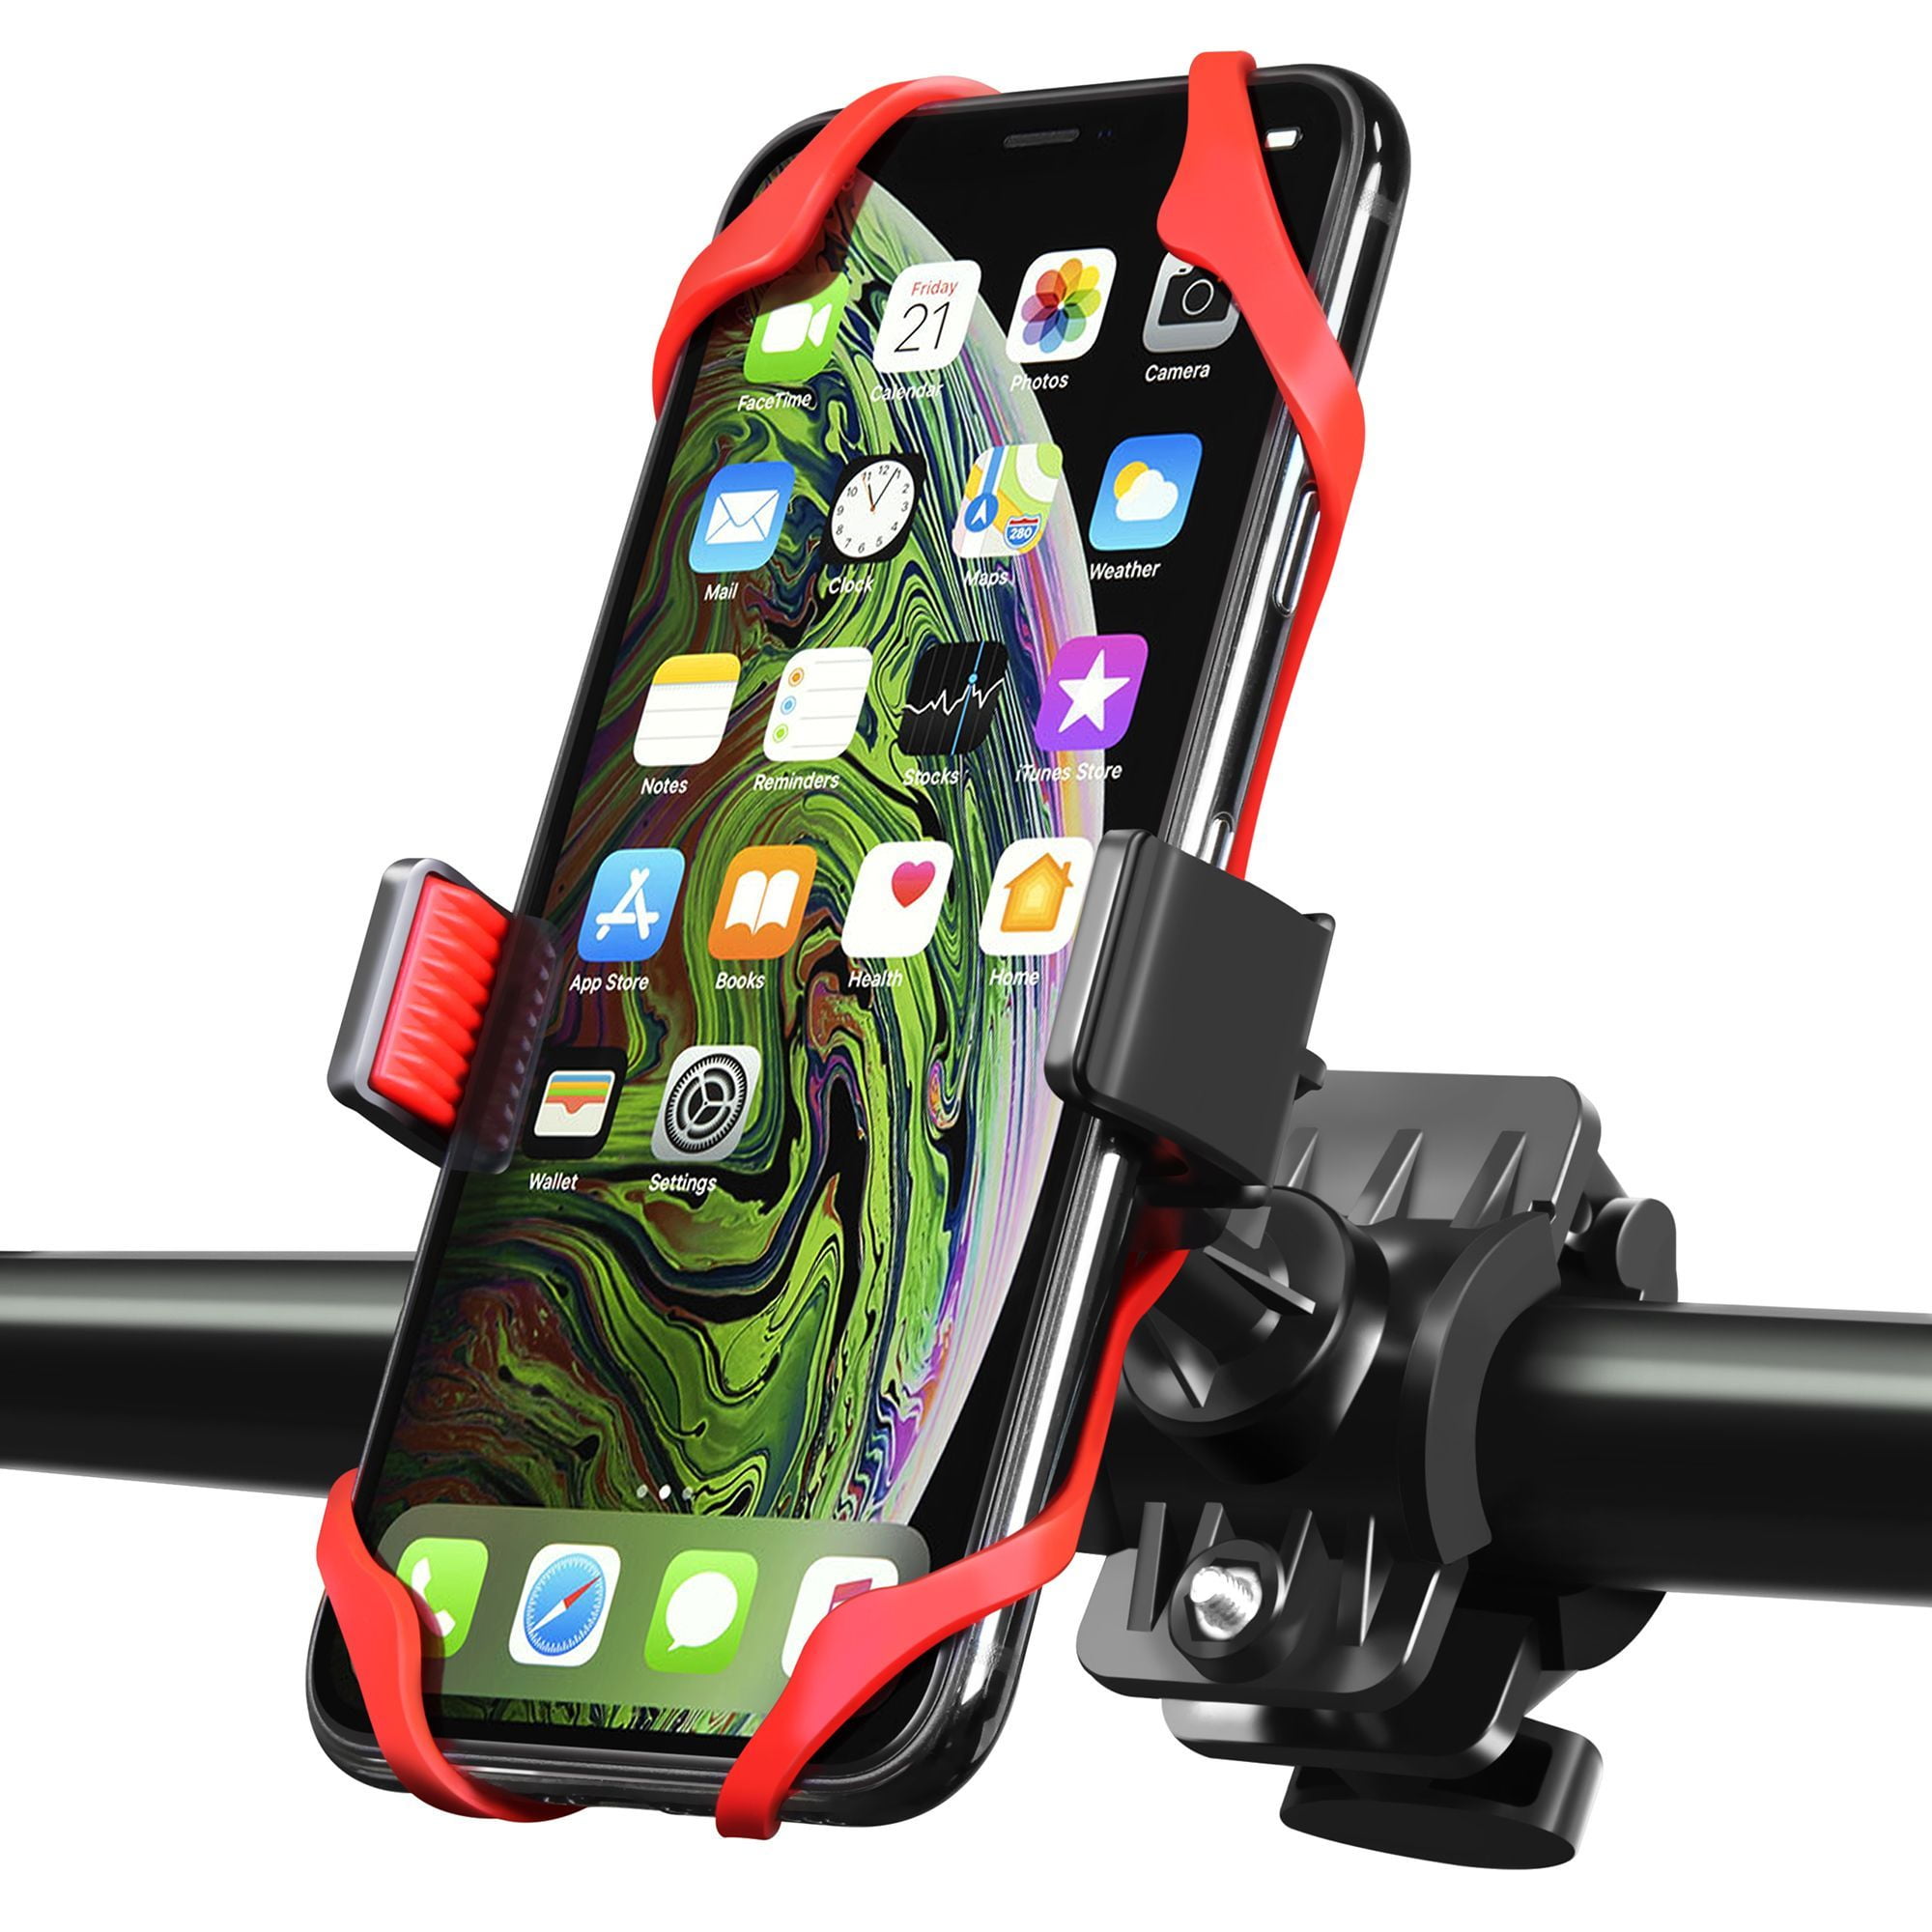 RYYMX Bicycle Phone Holder : 360°Rotation Adjustable Motorcycle Phone Mount for iPhone Xs Max XR X 8 7 6Plus Samsung S10+ S9 S8 Note 10 9 8 Bike Phone Mount GPS and 4-7 Android Cell Phones 